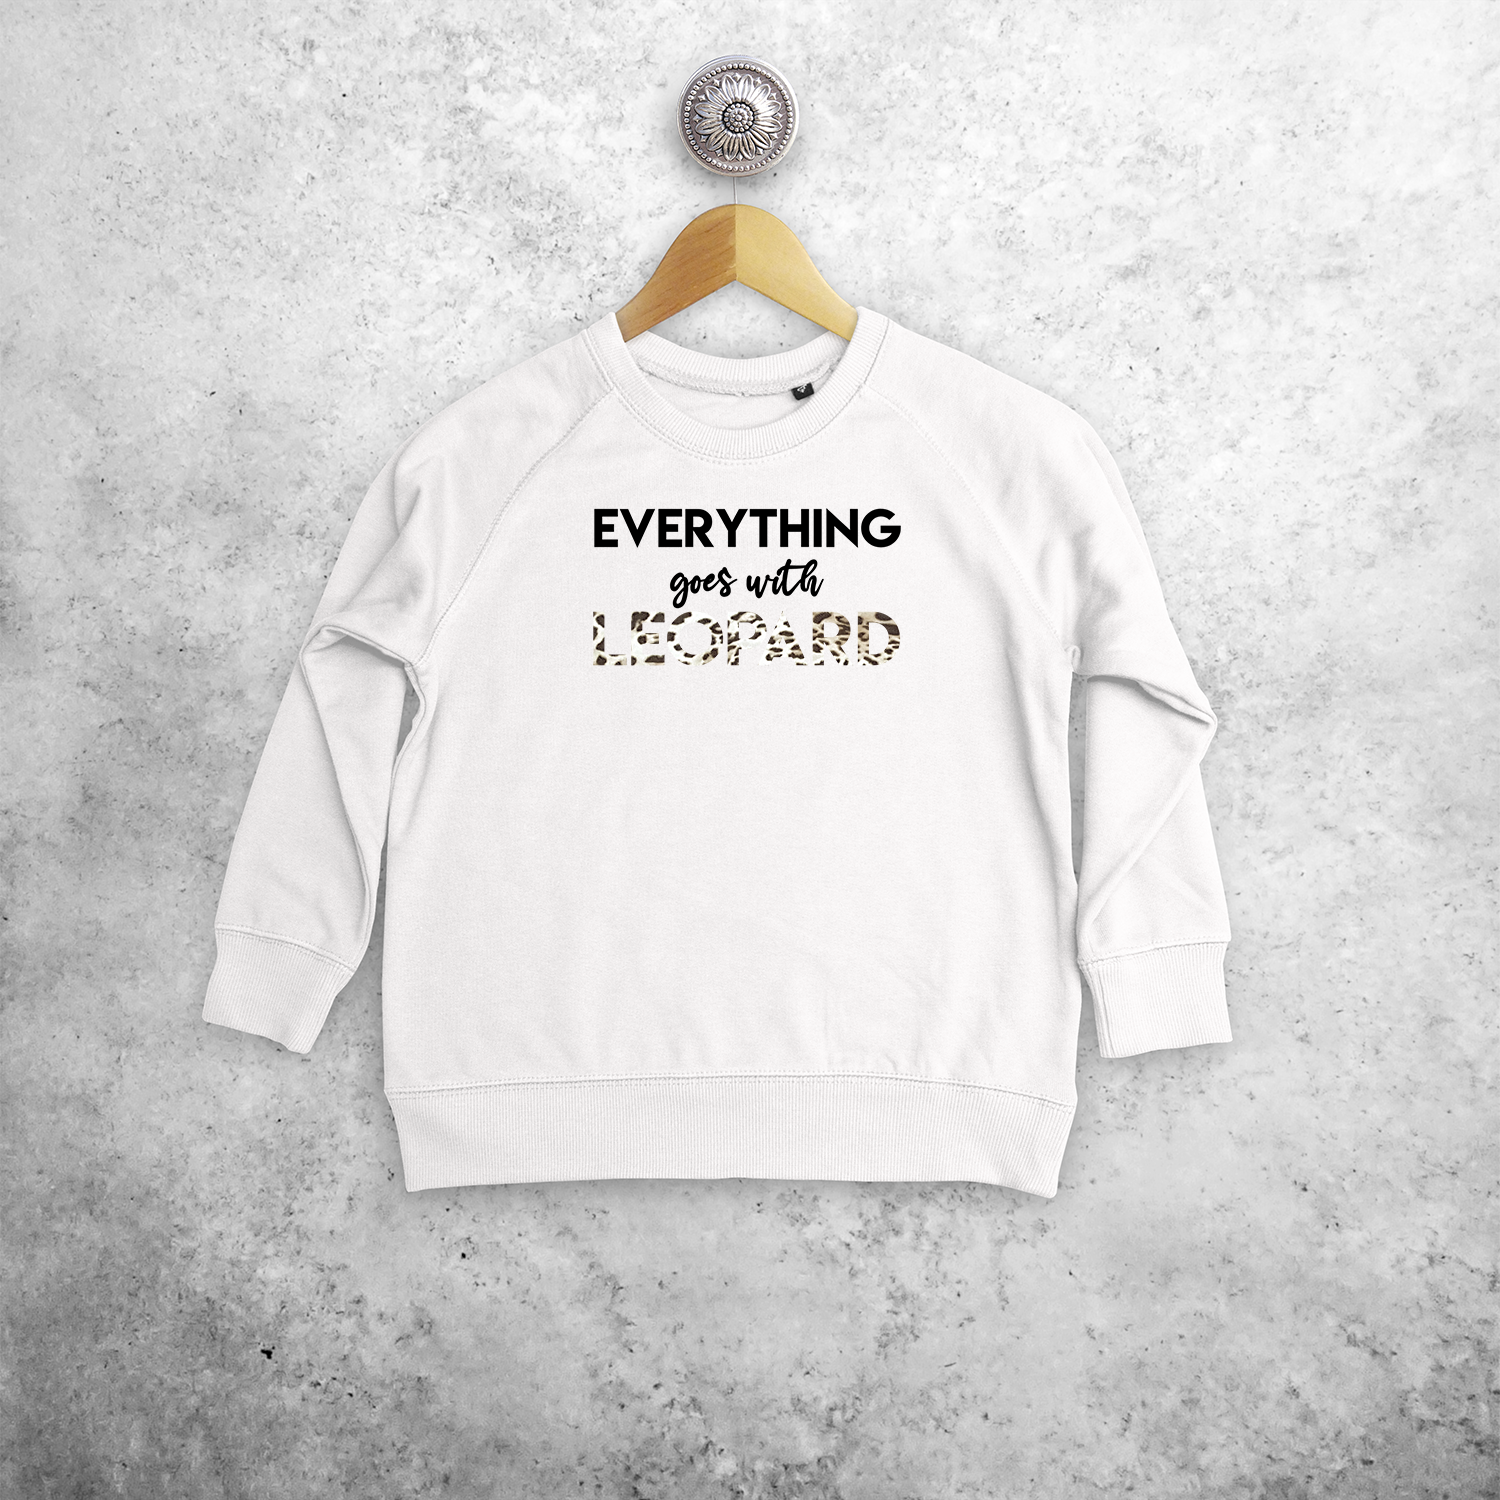 'Everything goes with leopard' kids sweater